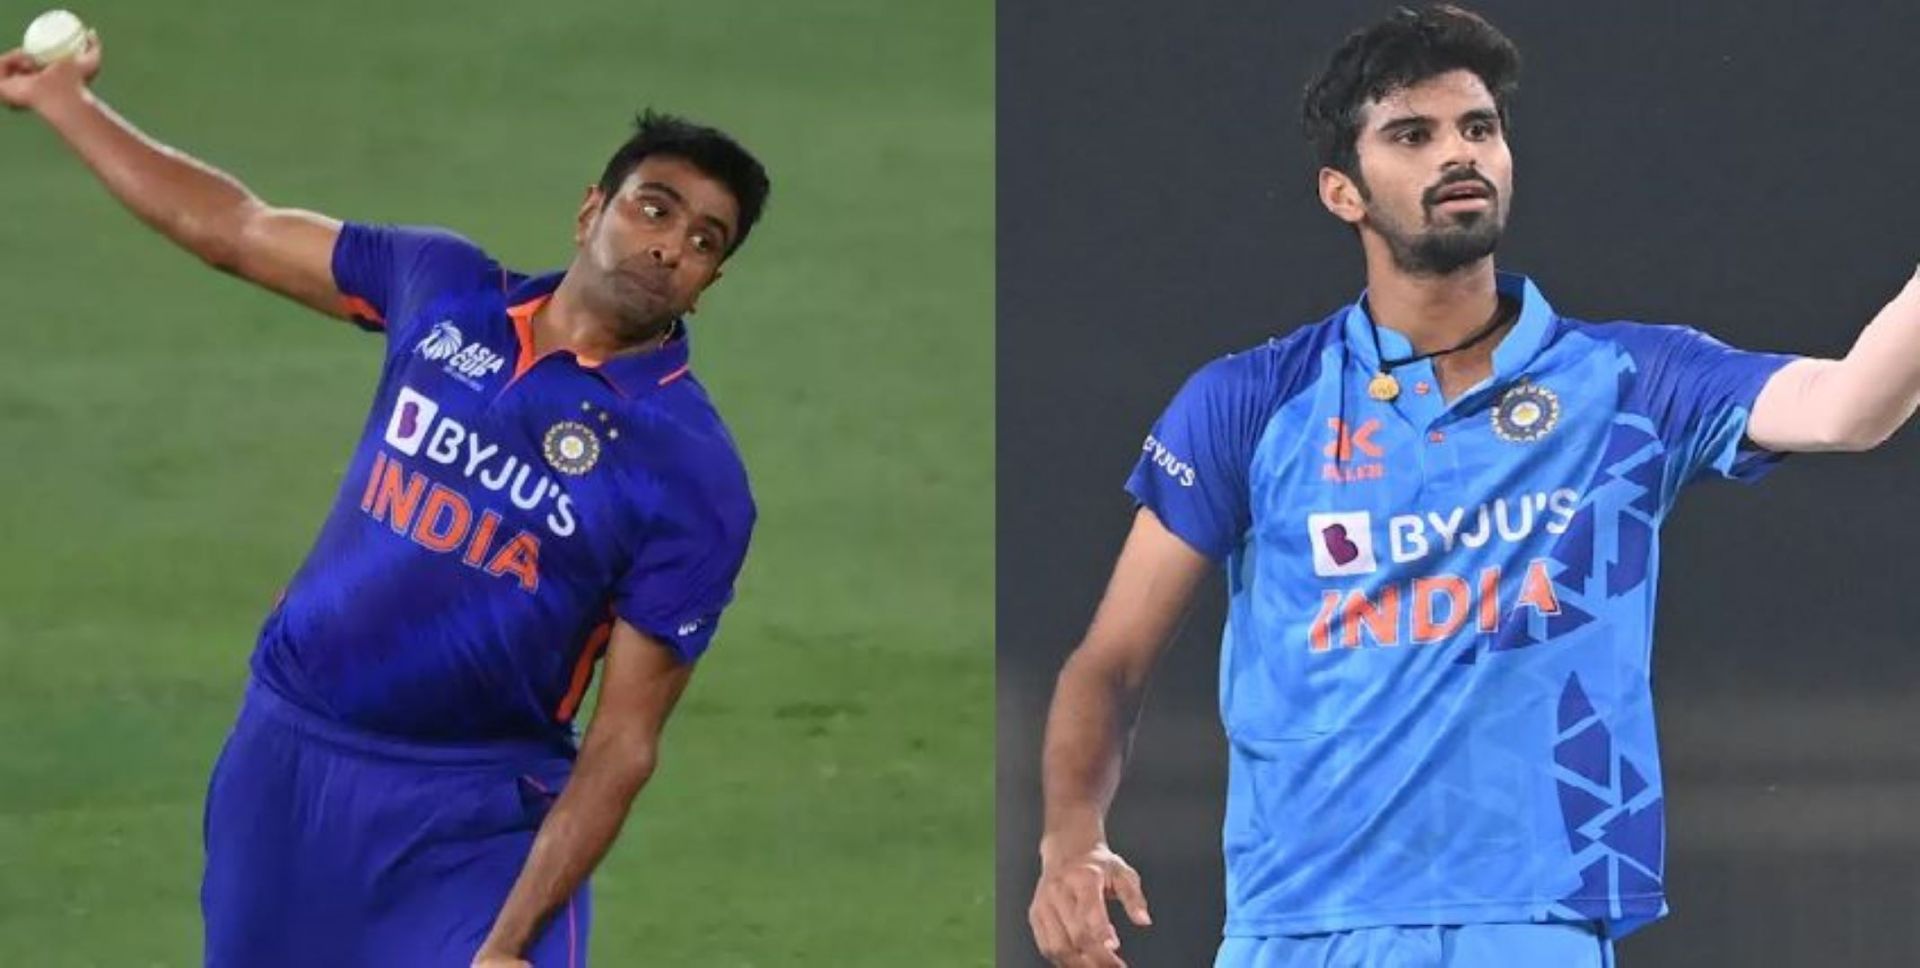 Both Ashwin and Sundar were impressive with the ball in the ODI series.